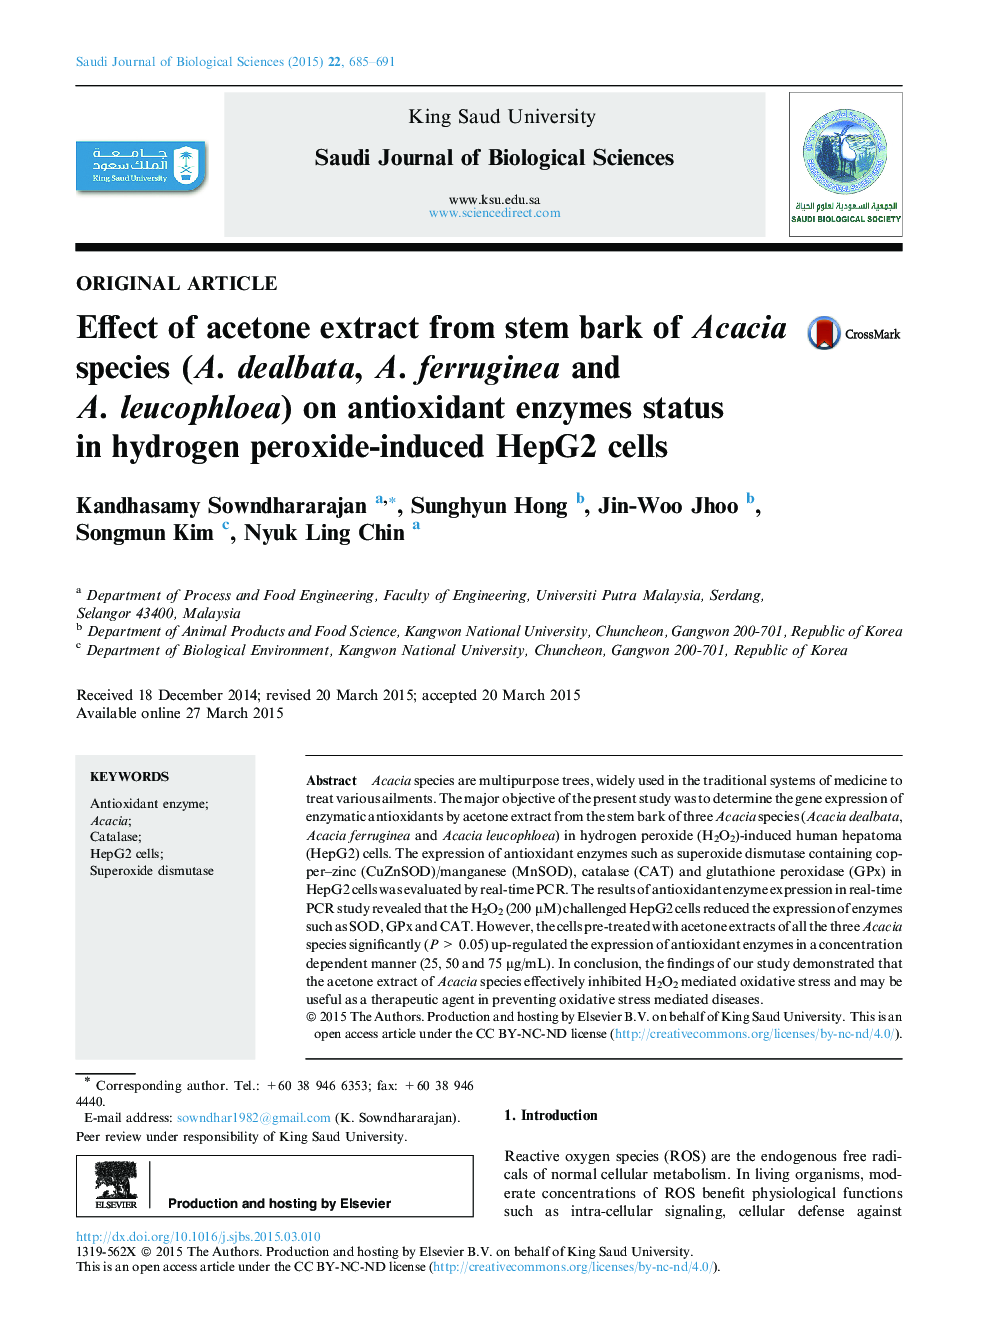 Effect of acetone extract from stem bark of Acacia species (A. dealbata, A. ferruginea and A. leucophloea) on antioxidant enzymes status in hydrogen peroxide-induced HepG2 cells 